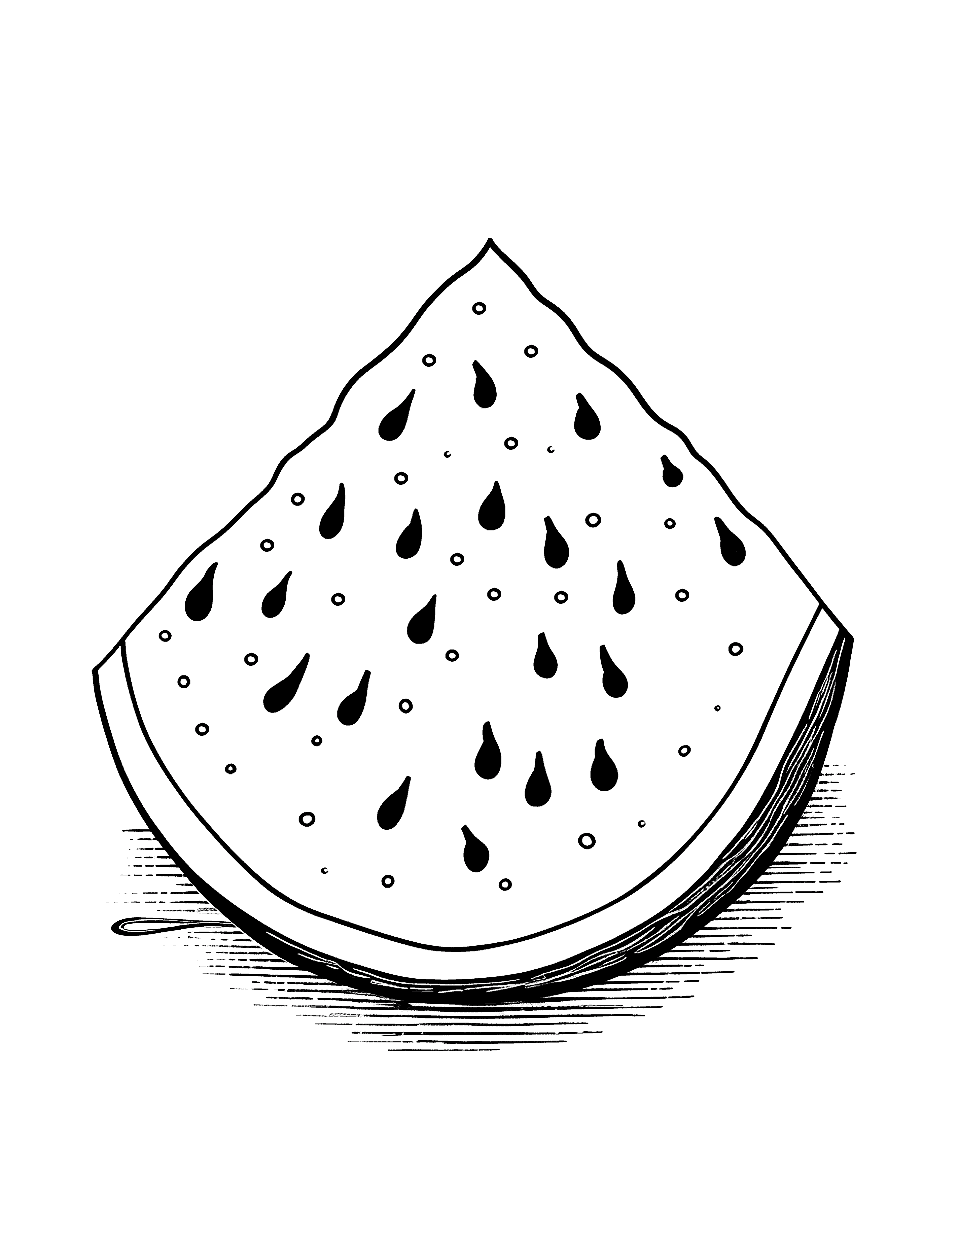 Watermelon Wonders Fruit Coloring Page - A watermelon slice with seeds.